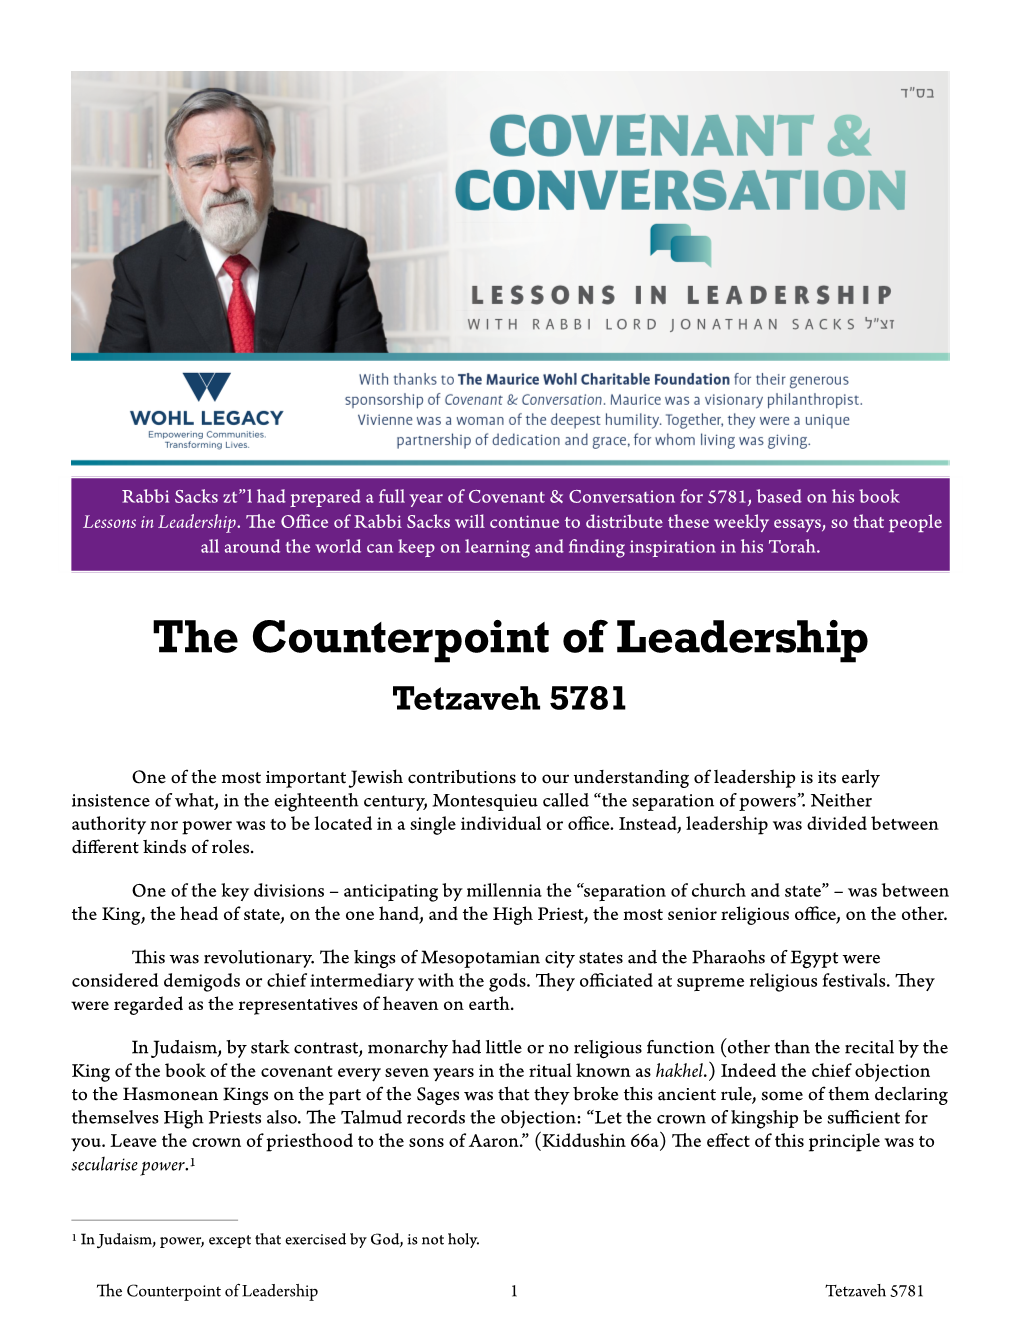 The Counterpoint of Leadership (Tetzaveh 5781)